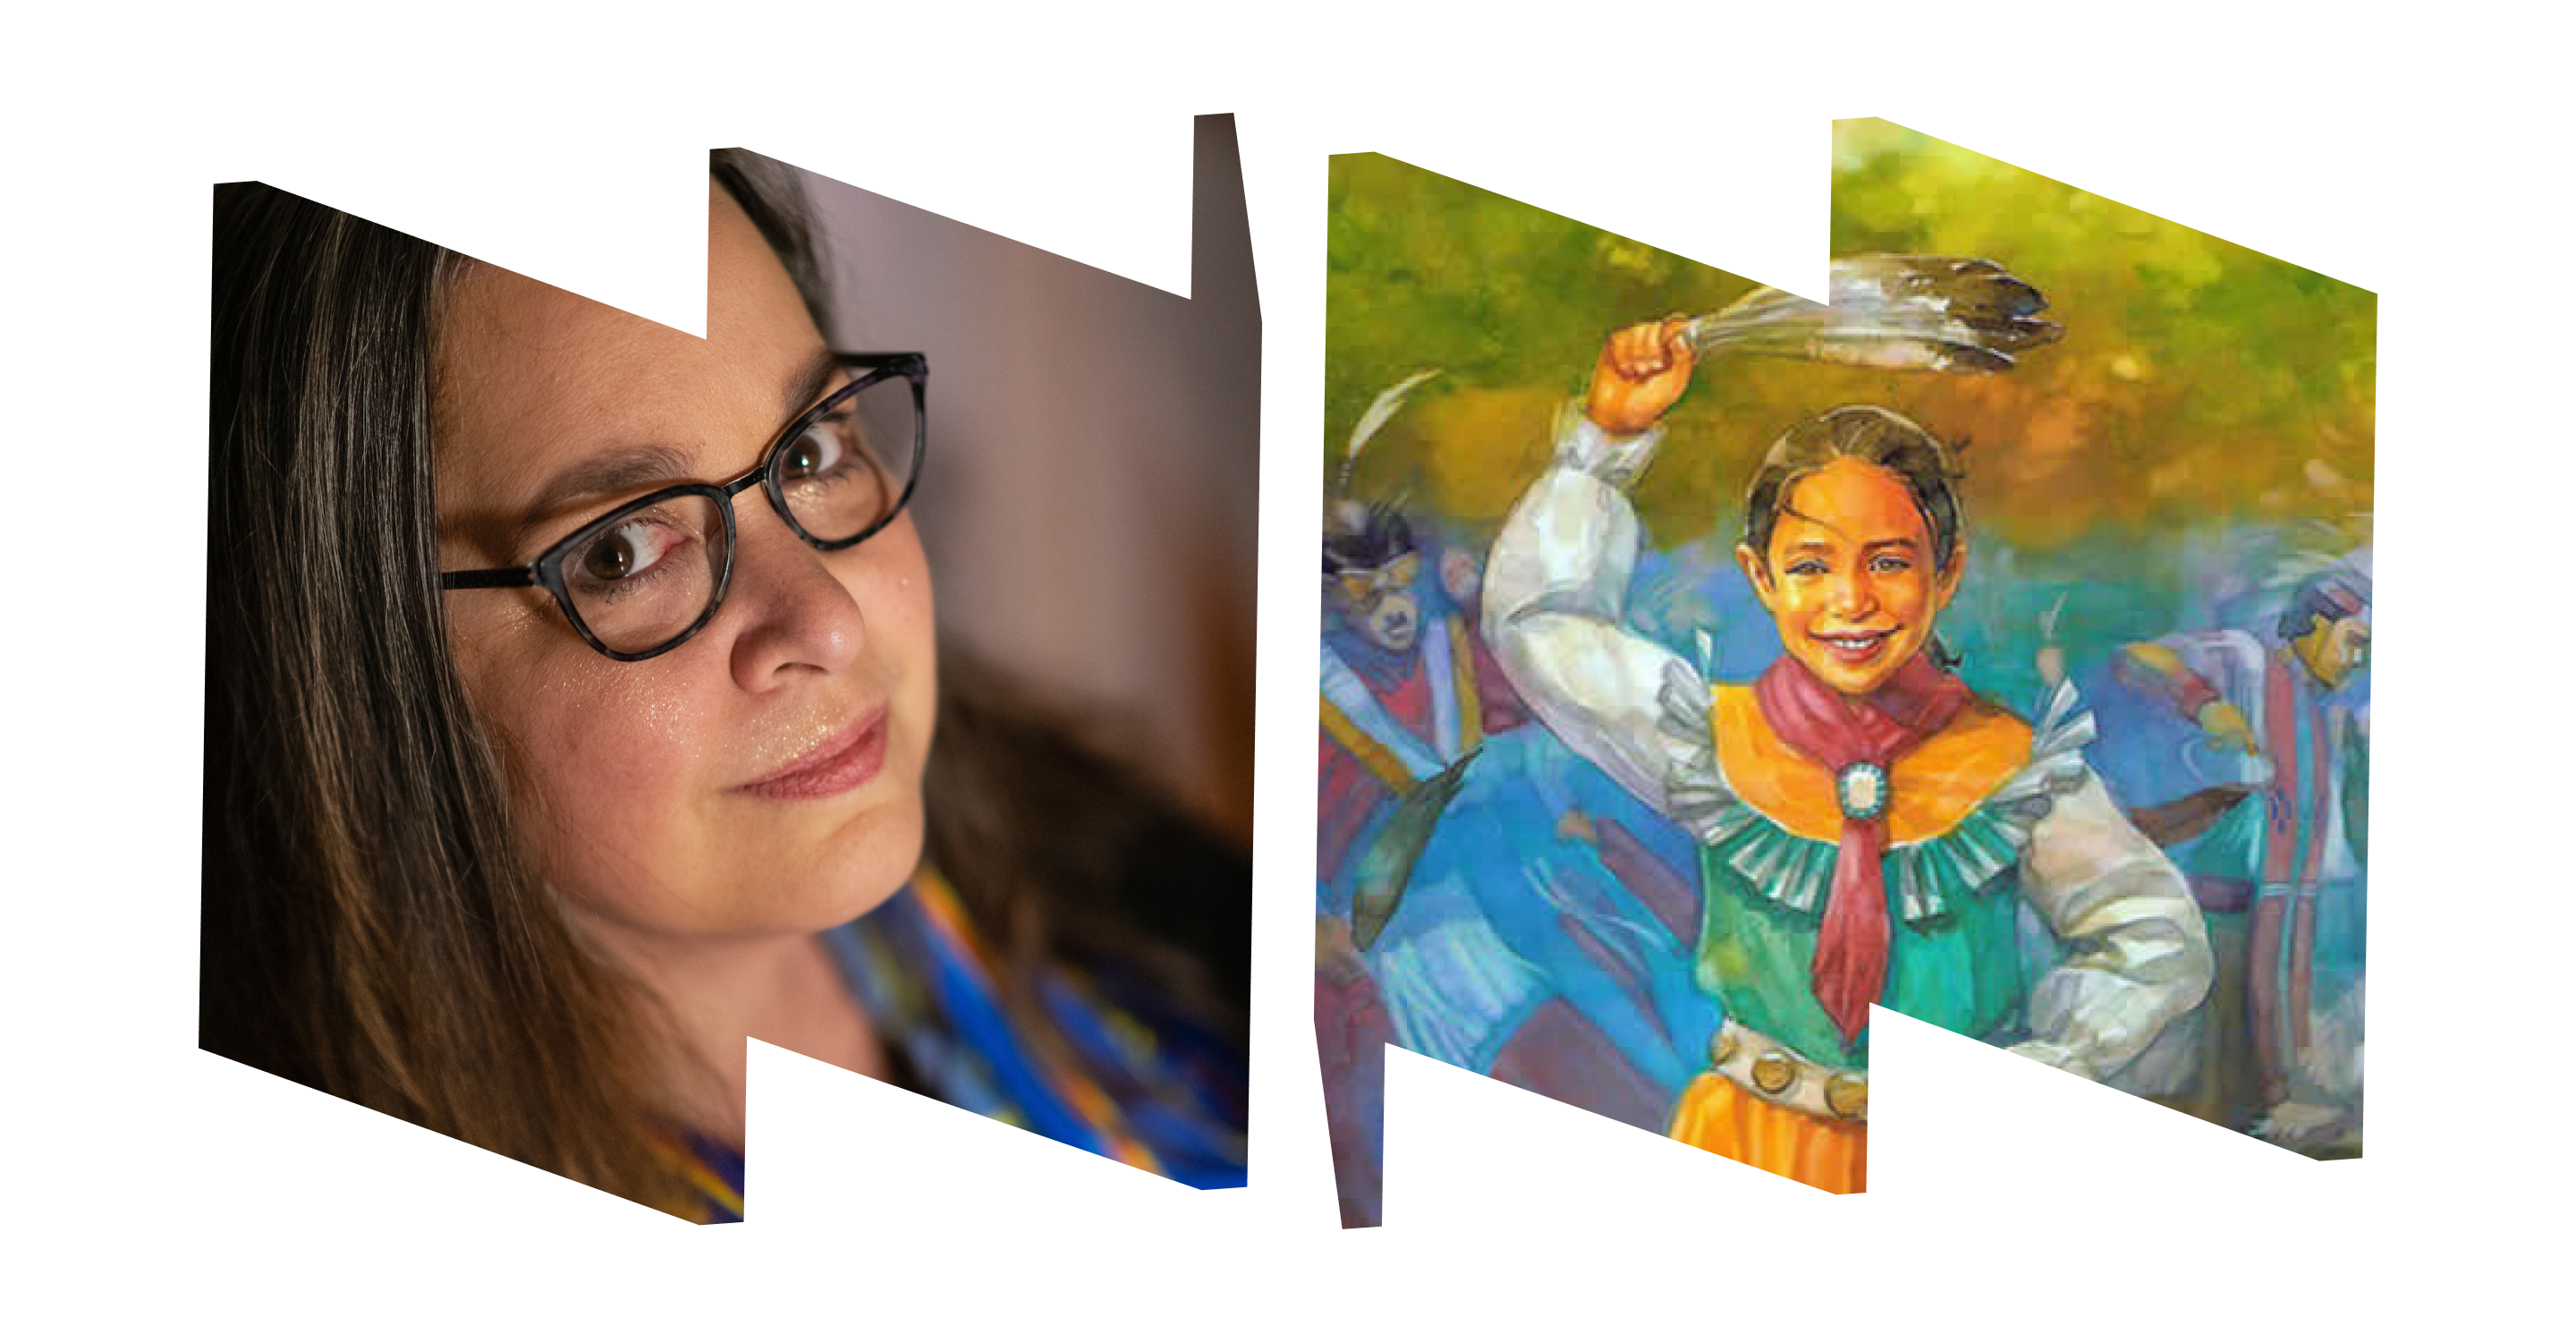 In left "W" frame, close-up, profile view of author Cynthia Leitich Smith wearing glasses; in right "W" frame, close up of young girl dancing and holding a feather above her head.